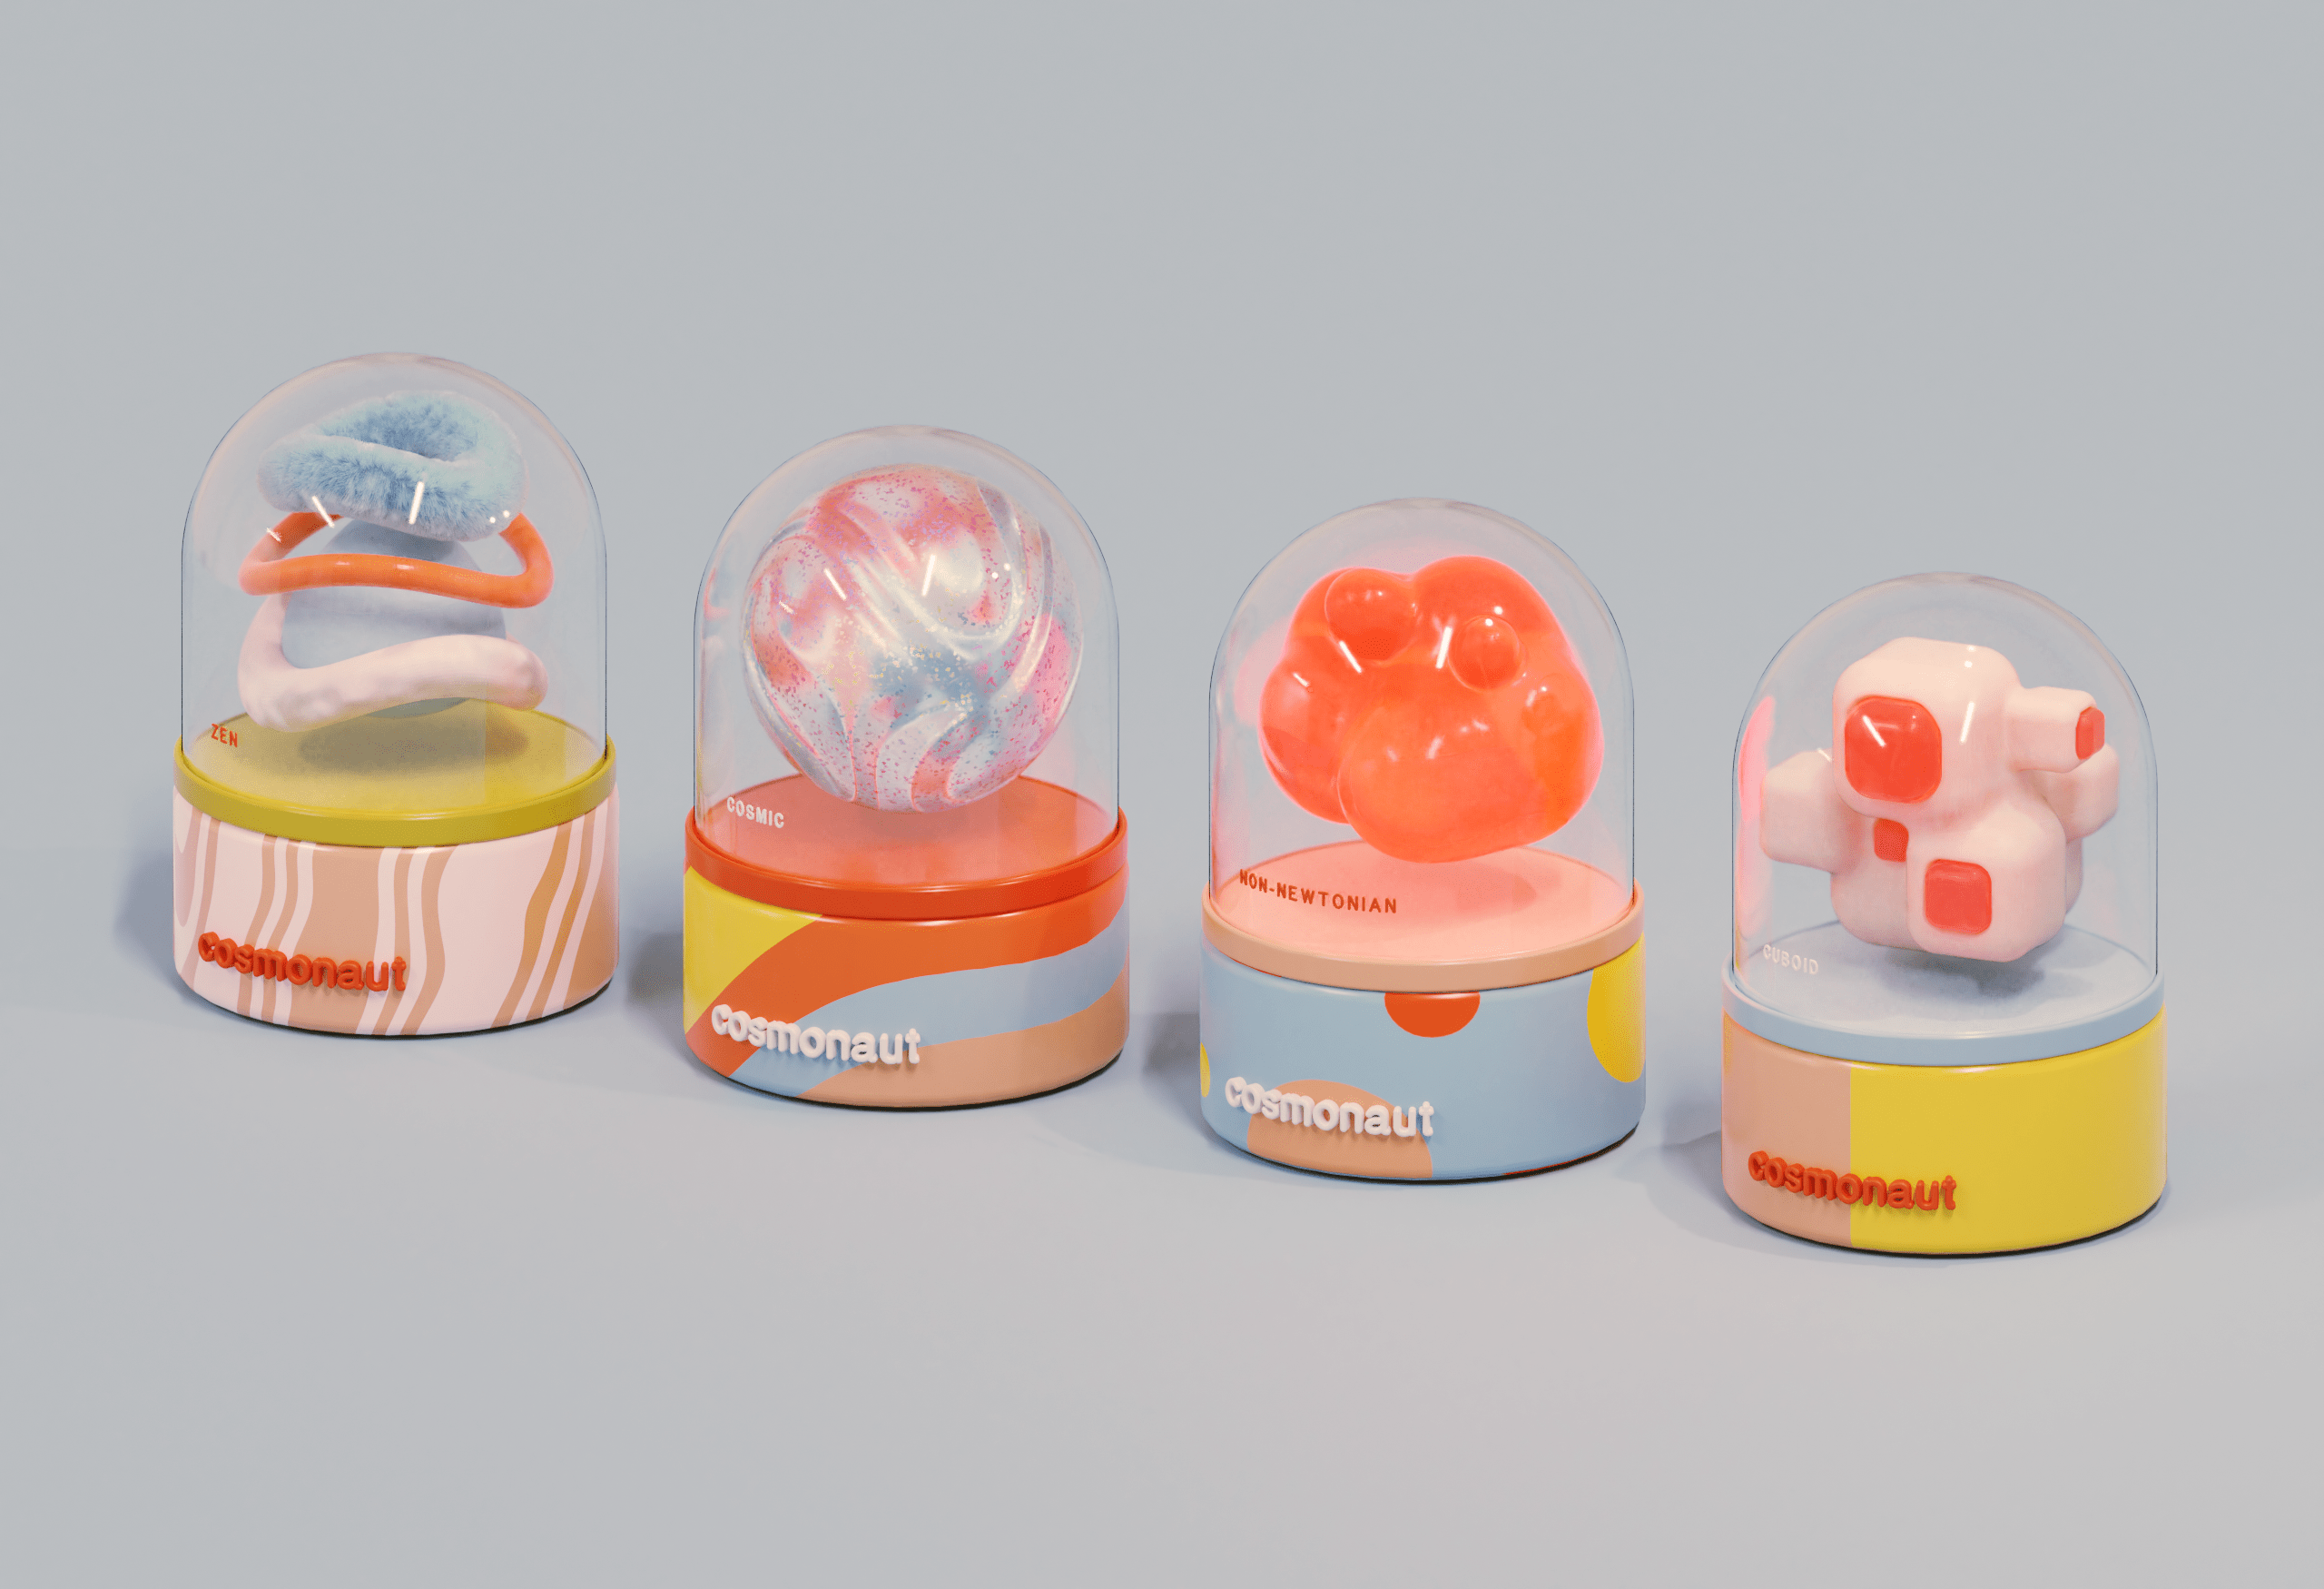 four capsule-shaped packages, each containing an abstractly-shaped item behind a plastic dome. the base of each capsule reads "cosmonaut".